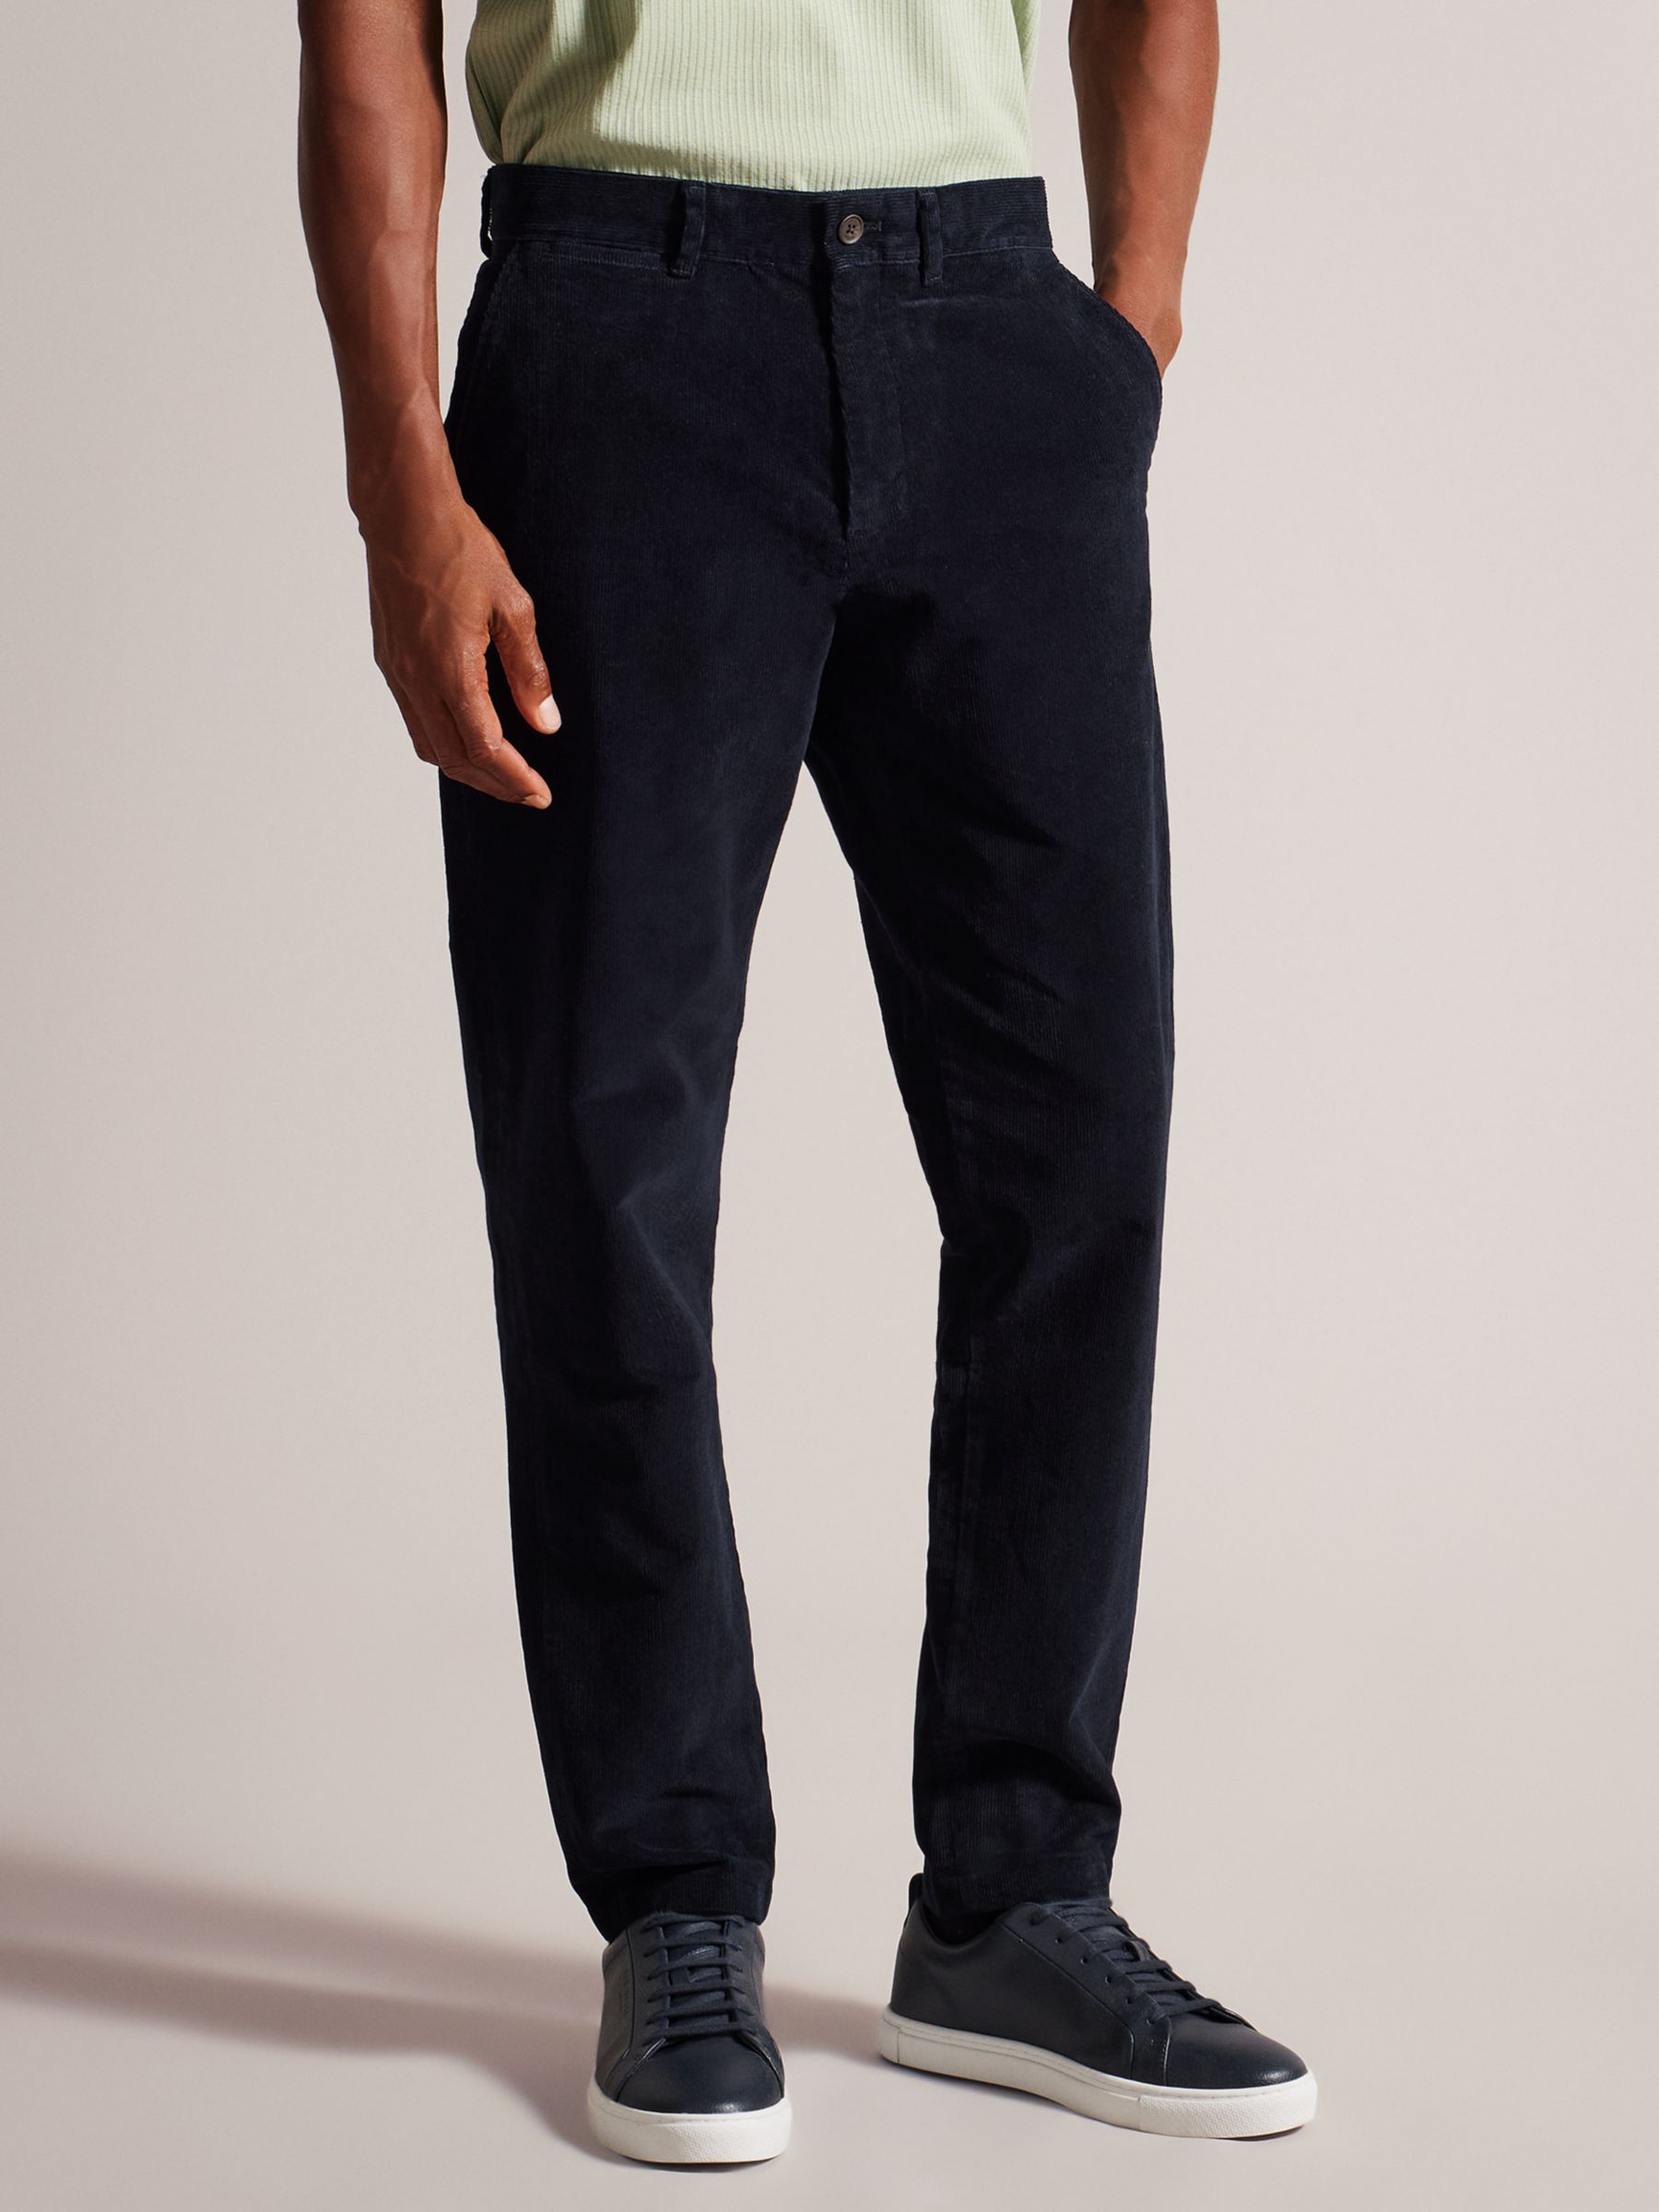 Ted Baker Payet Regular Fit Cord Trousers, Blue Navy at John Lewis ...